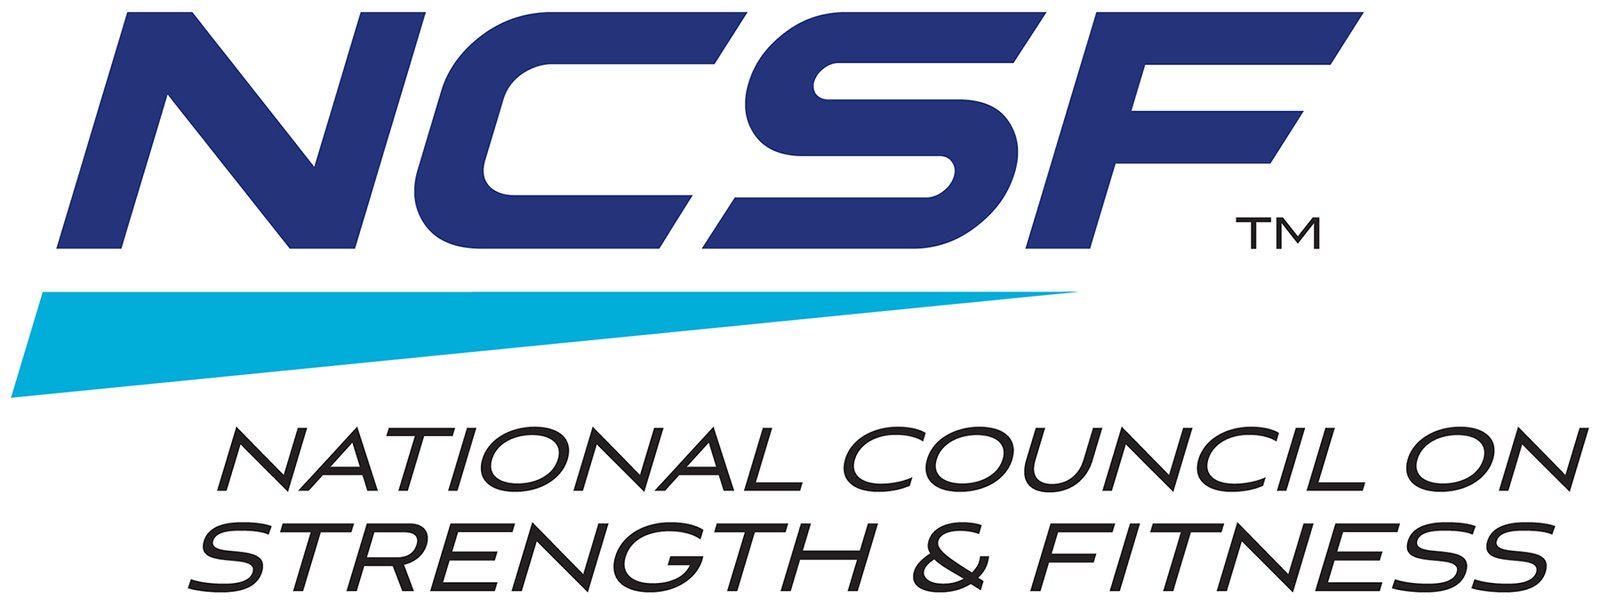 National Council on Strength & Fitness (NCSF): Empowering Exercise Professionals